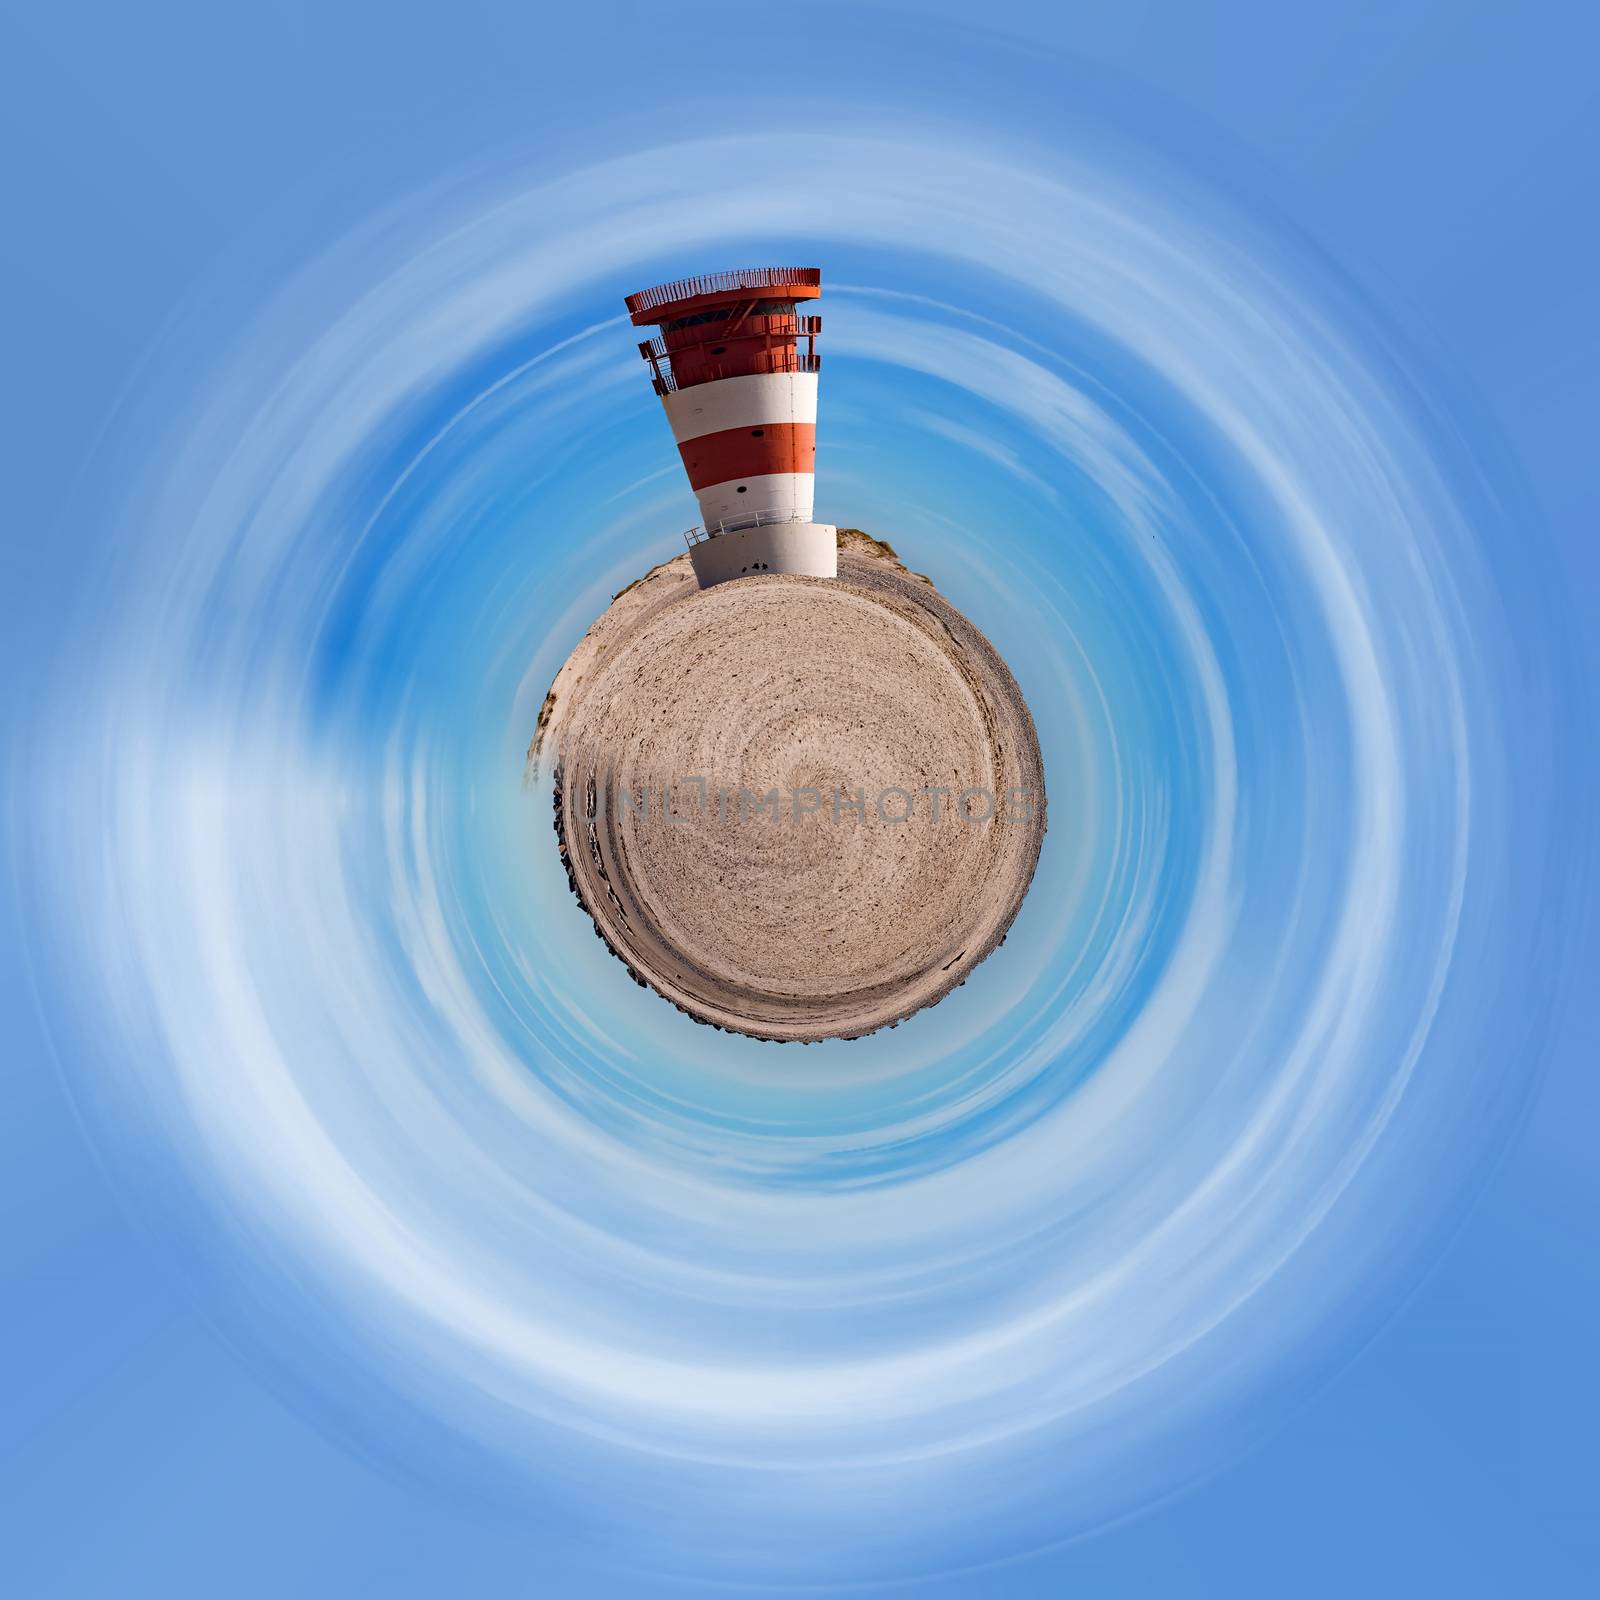 Planet of lighthouse at heligoland dune island with blue sky. Little planet concept. Tiny planet projection